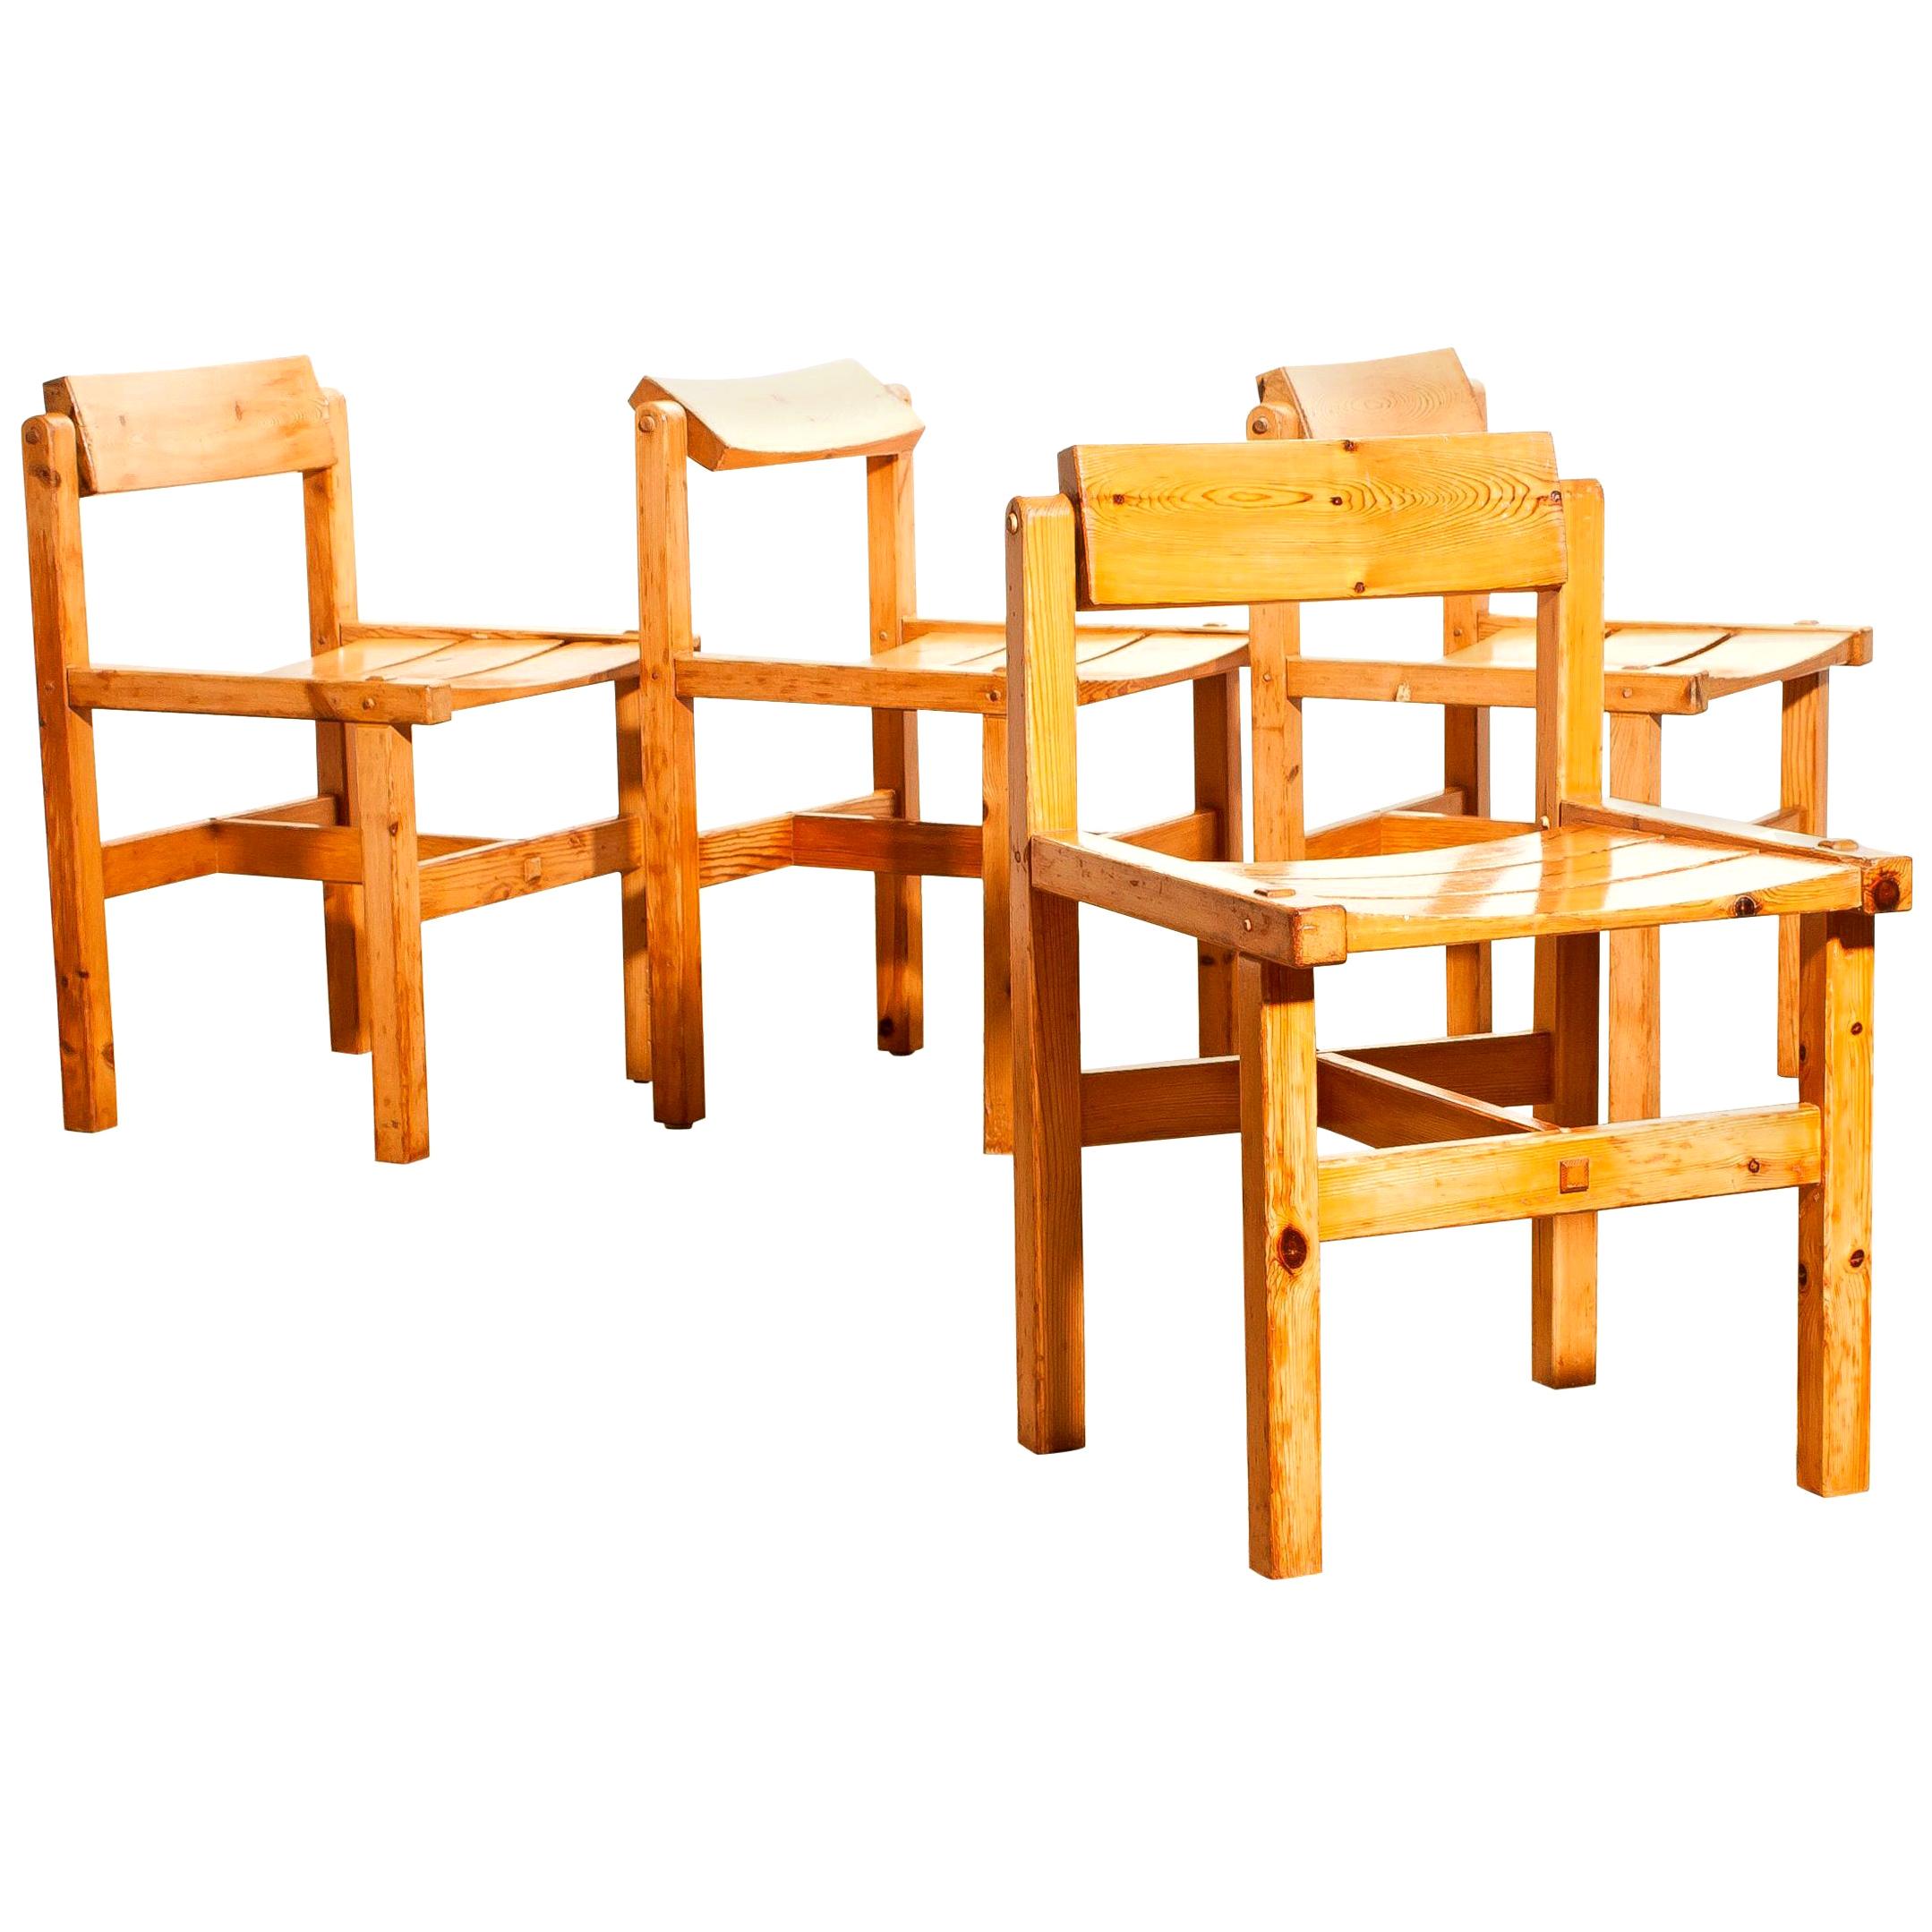 1960s, Set of Four Pine Dining Chairs by Edvin Helseth, Norway 1